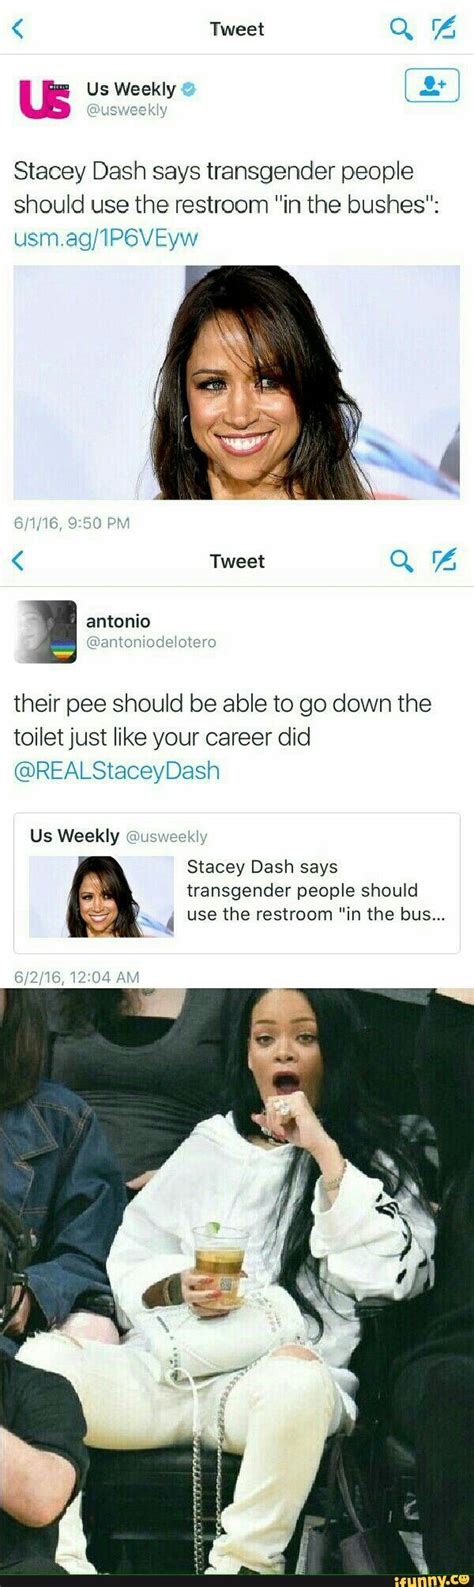 stacey dash says transgender people should use the restroom in the bushes their pee should be